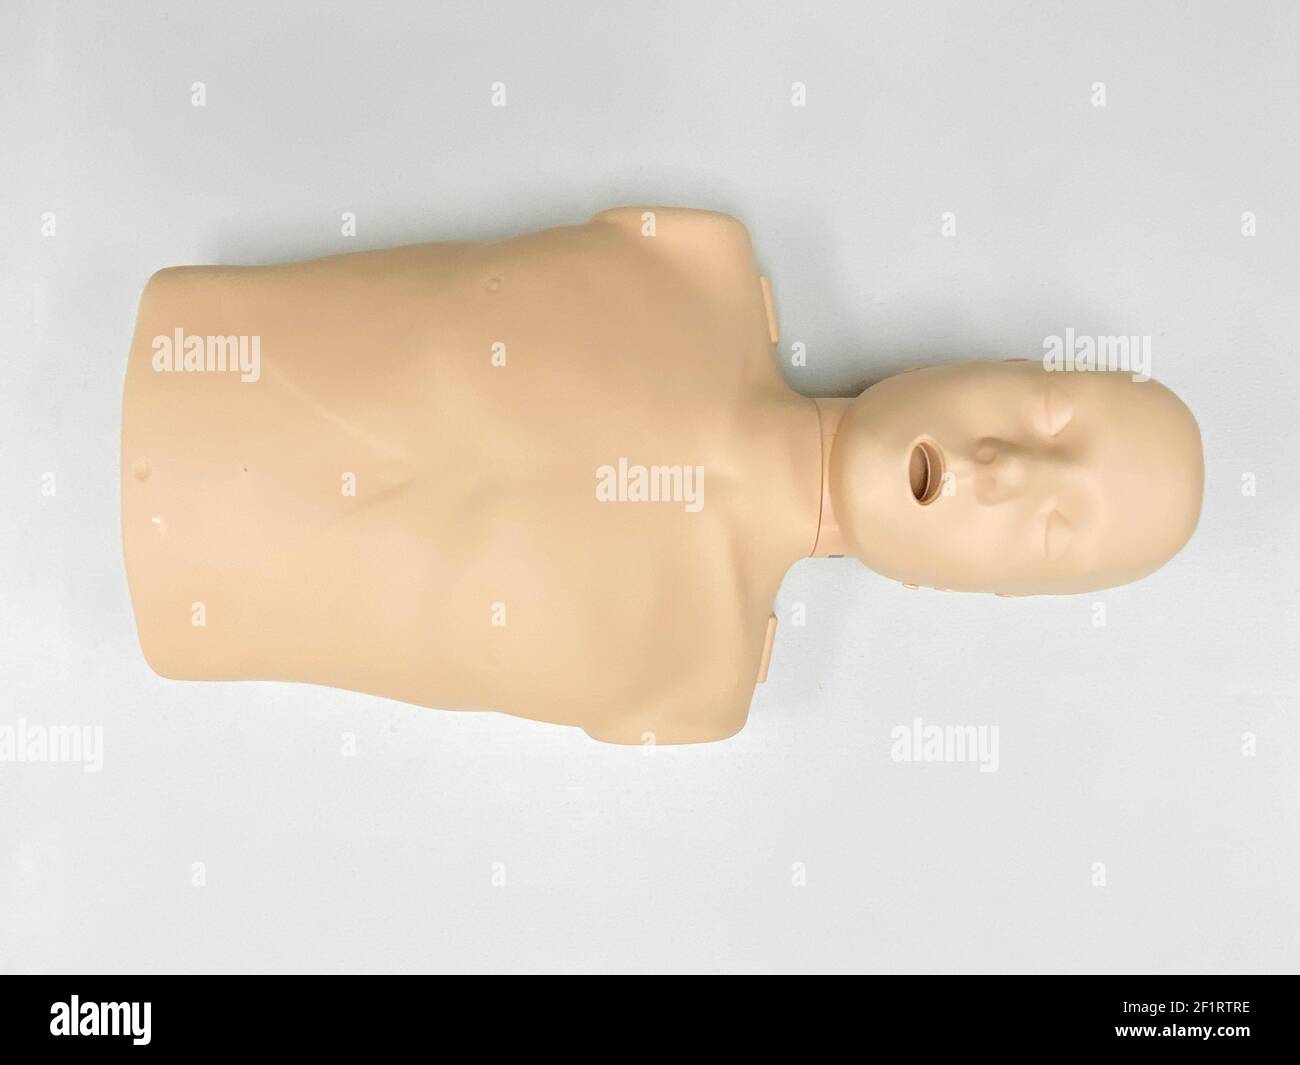 CPR dummy on white background for first aid and cardiopulmonary resuscitation training Stock Photo